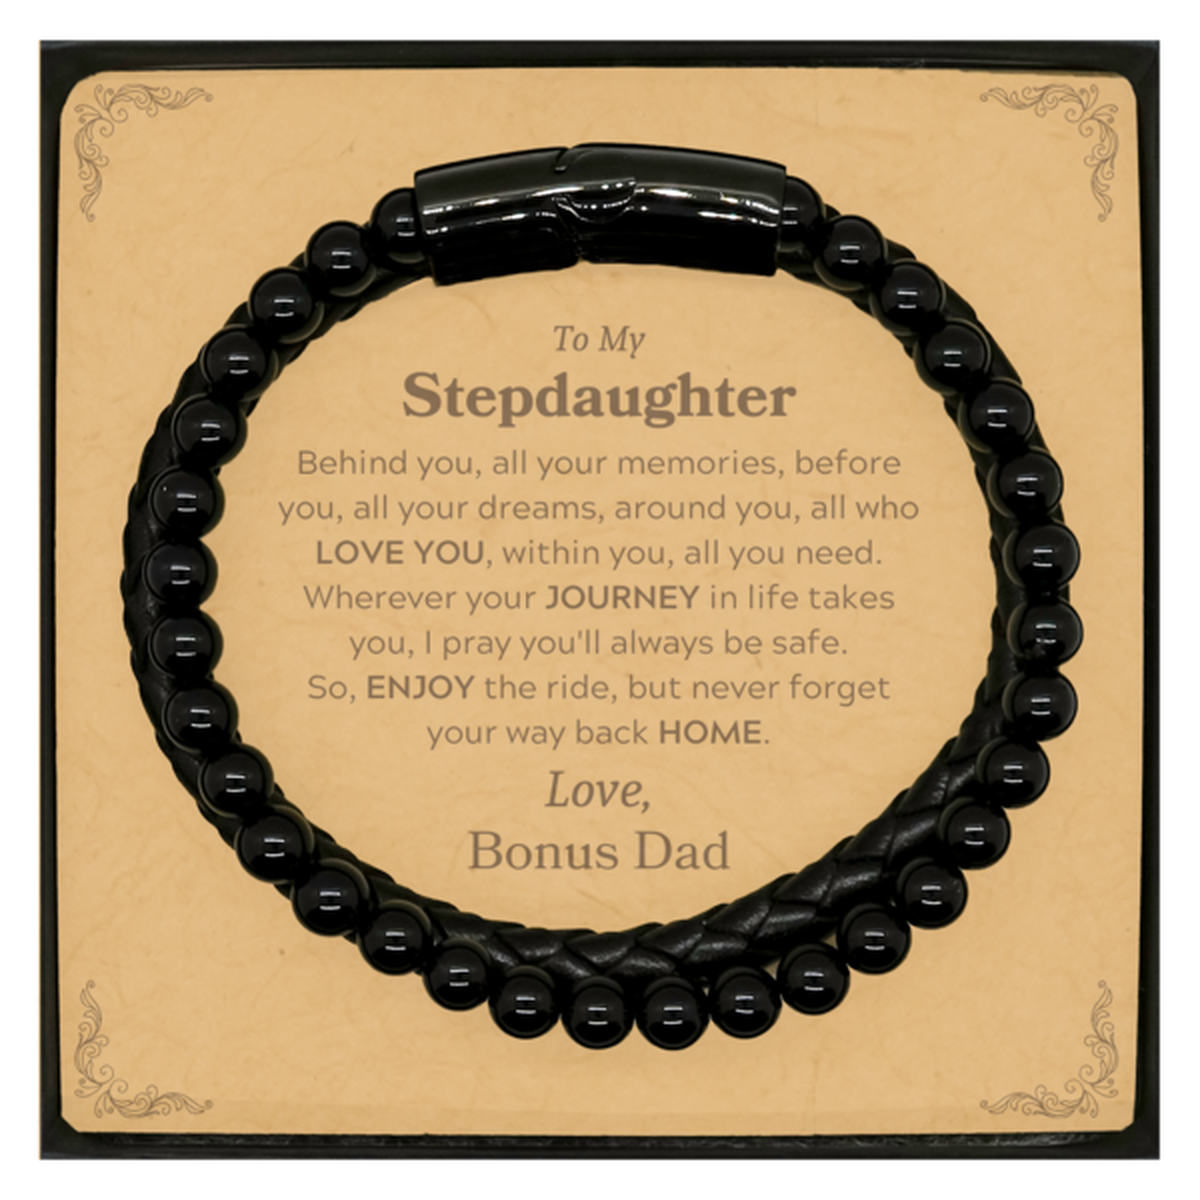 To My Stepdaughter Graduation Gifts from Bonus Dad, Stepdaughter Stone Leather Bracelets Christmas Birthday Gifts for Stepdaughter Behind you, all your memories, before you, all your dreams. Love, Bonus Dad